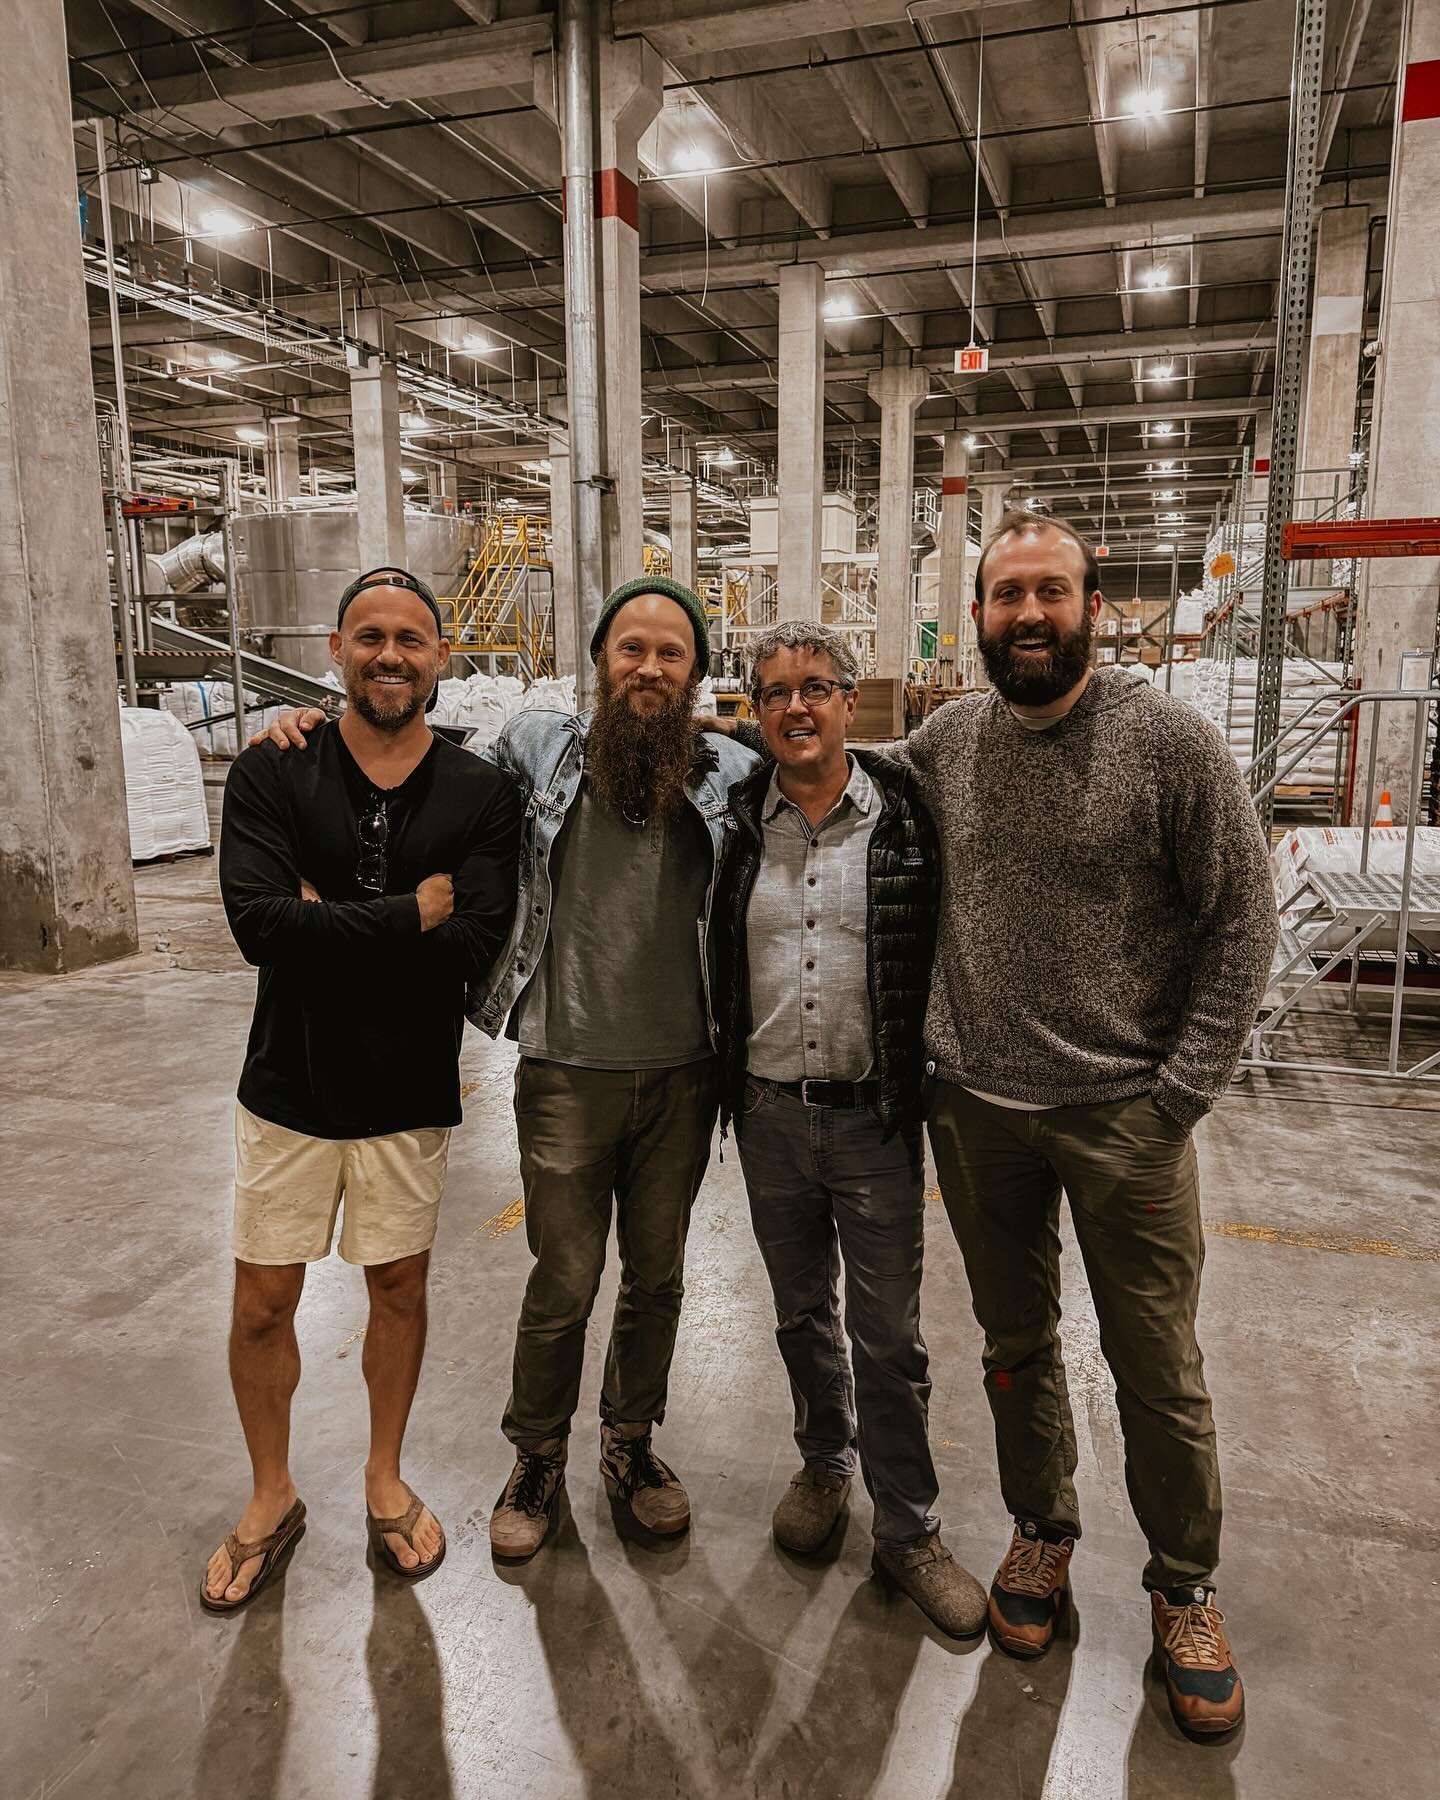 This past weekend was another one brimming with inspiration, collaboration, and the culmination of why we do this.&nbsp;

After burning the midnight oil at @burialbeer for our collaboration release, we headed over to meet up with our malt pioneering 